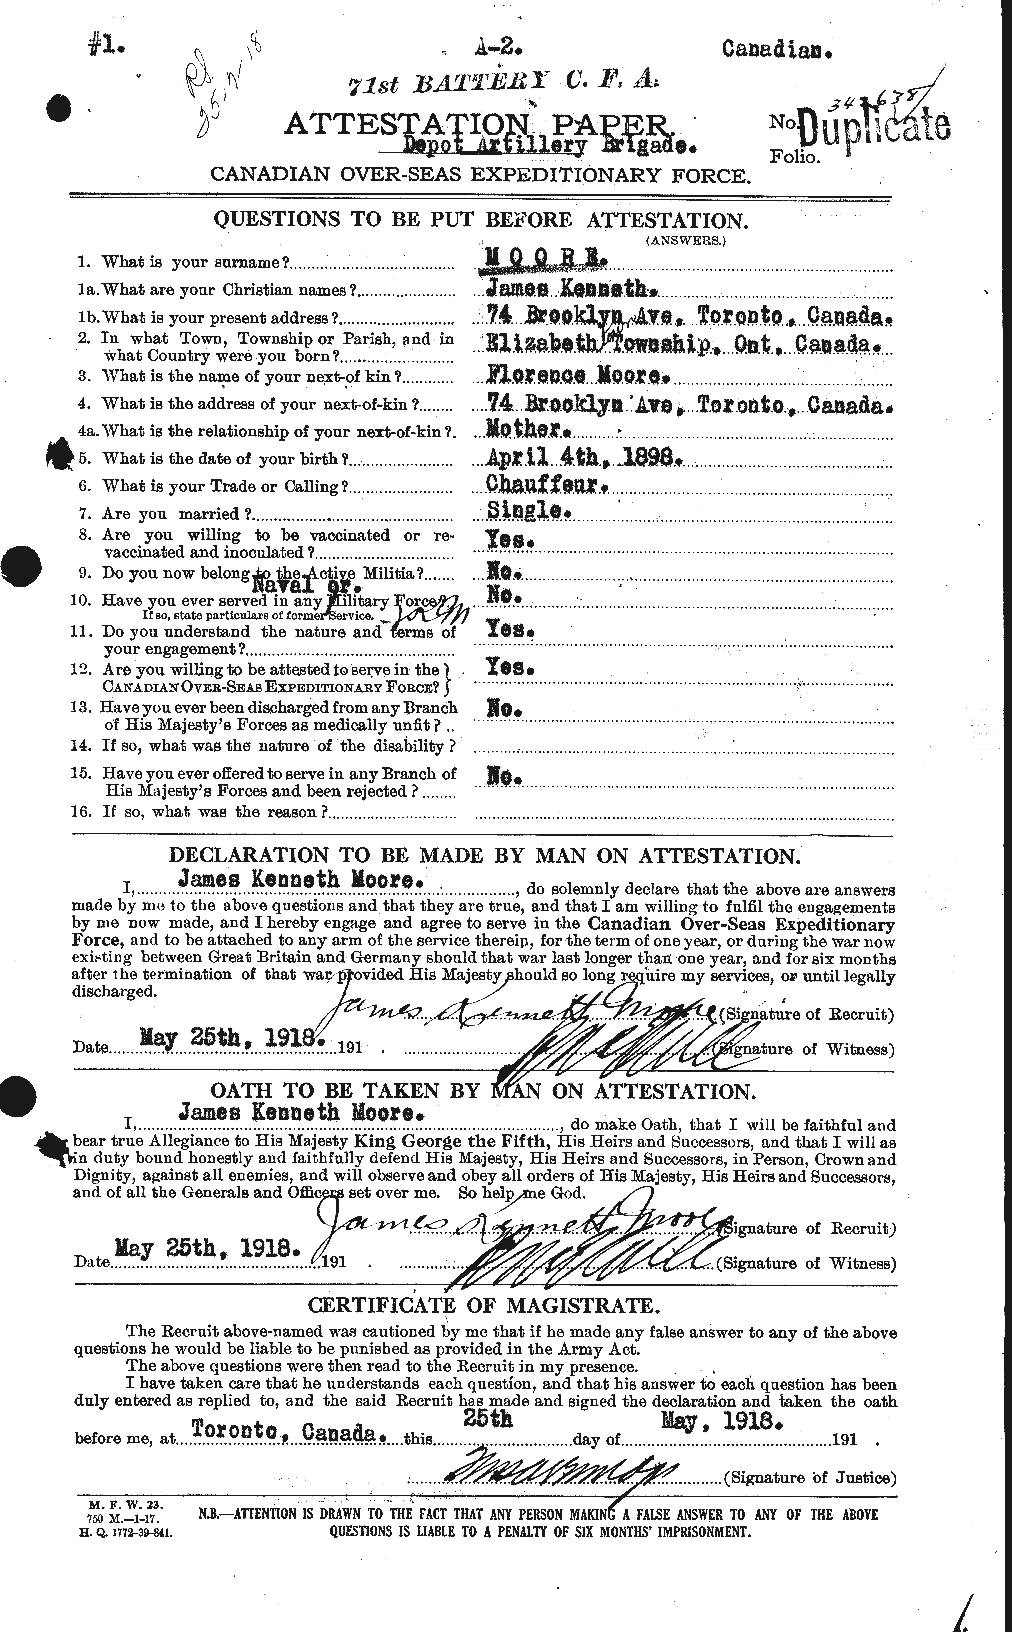 Personnel Records of the First World War - CEF 502229a